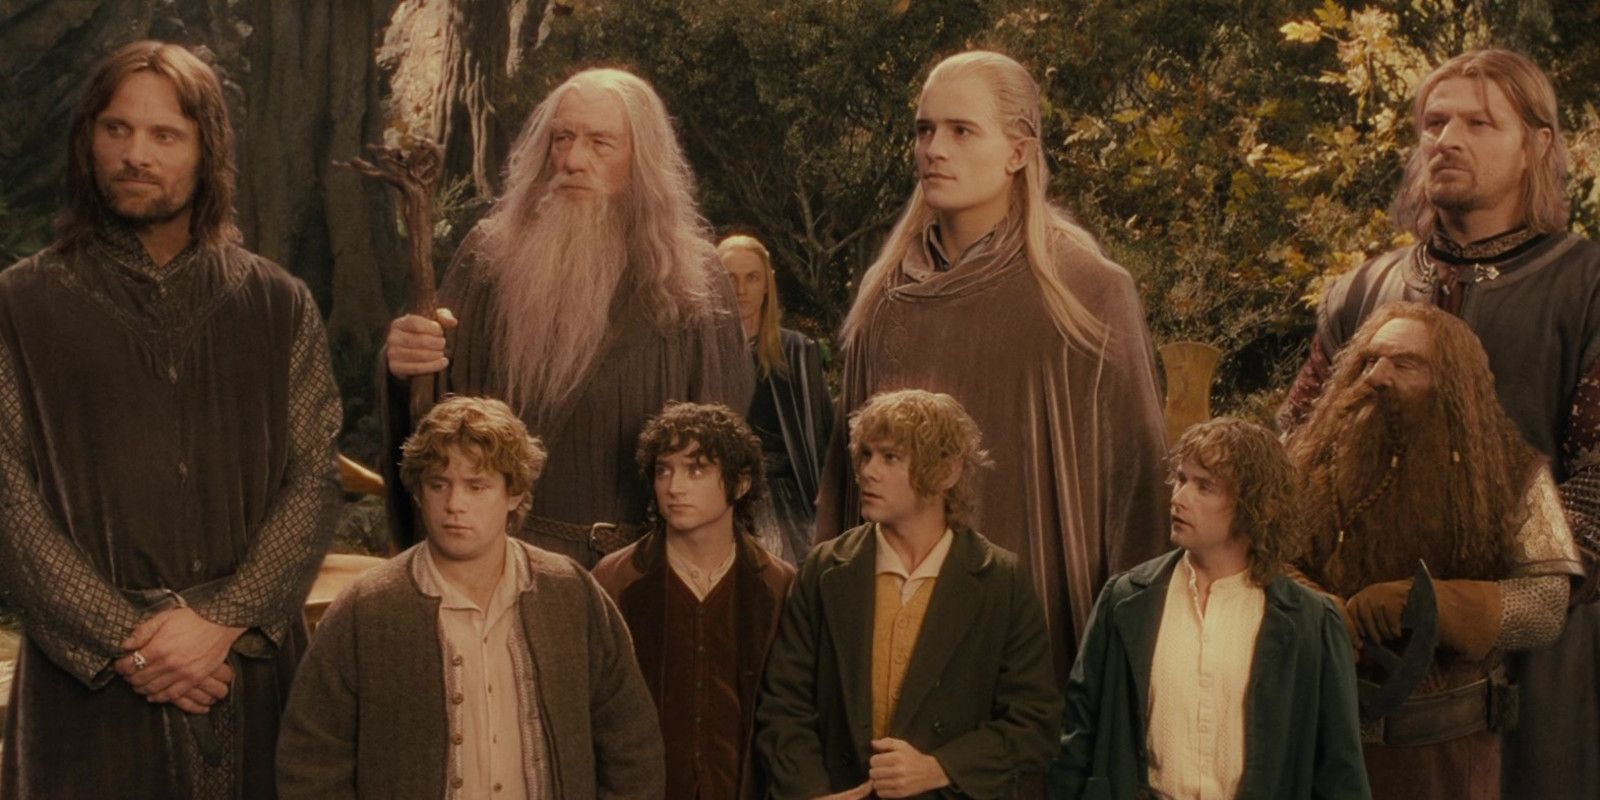 The Fellowship standing together in The Lord of the Rings Movies